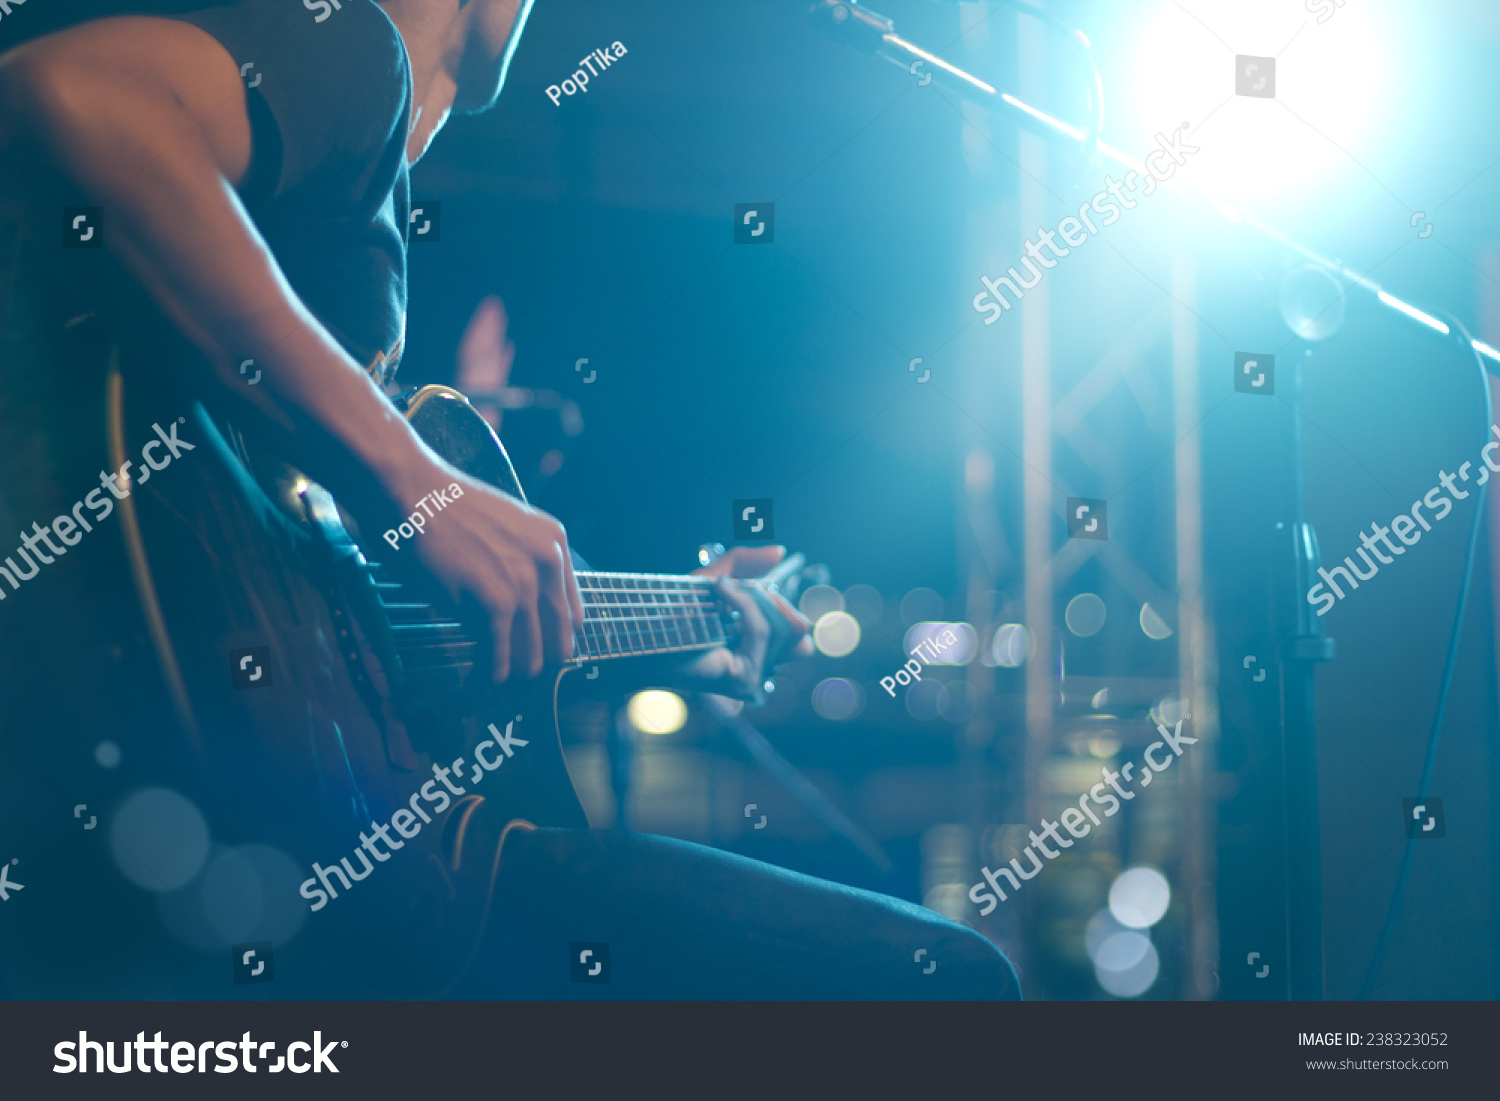 Guitarist on stage for background, soft and blur concept #238323052